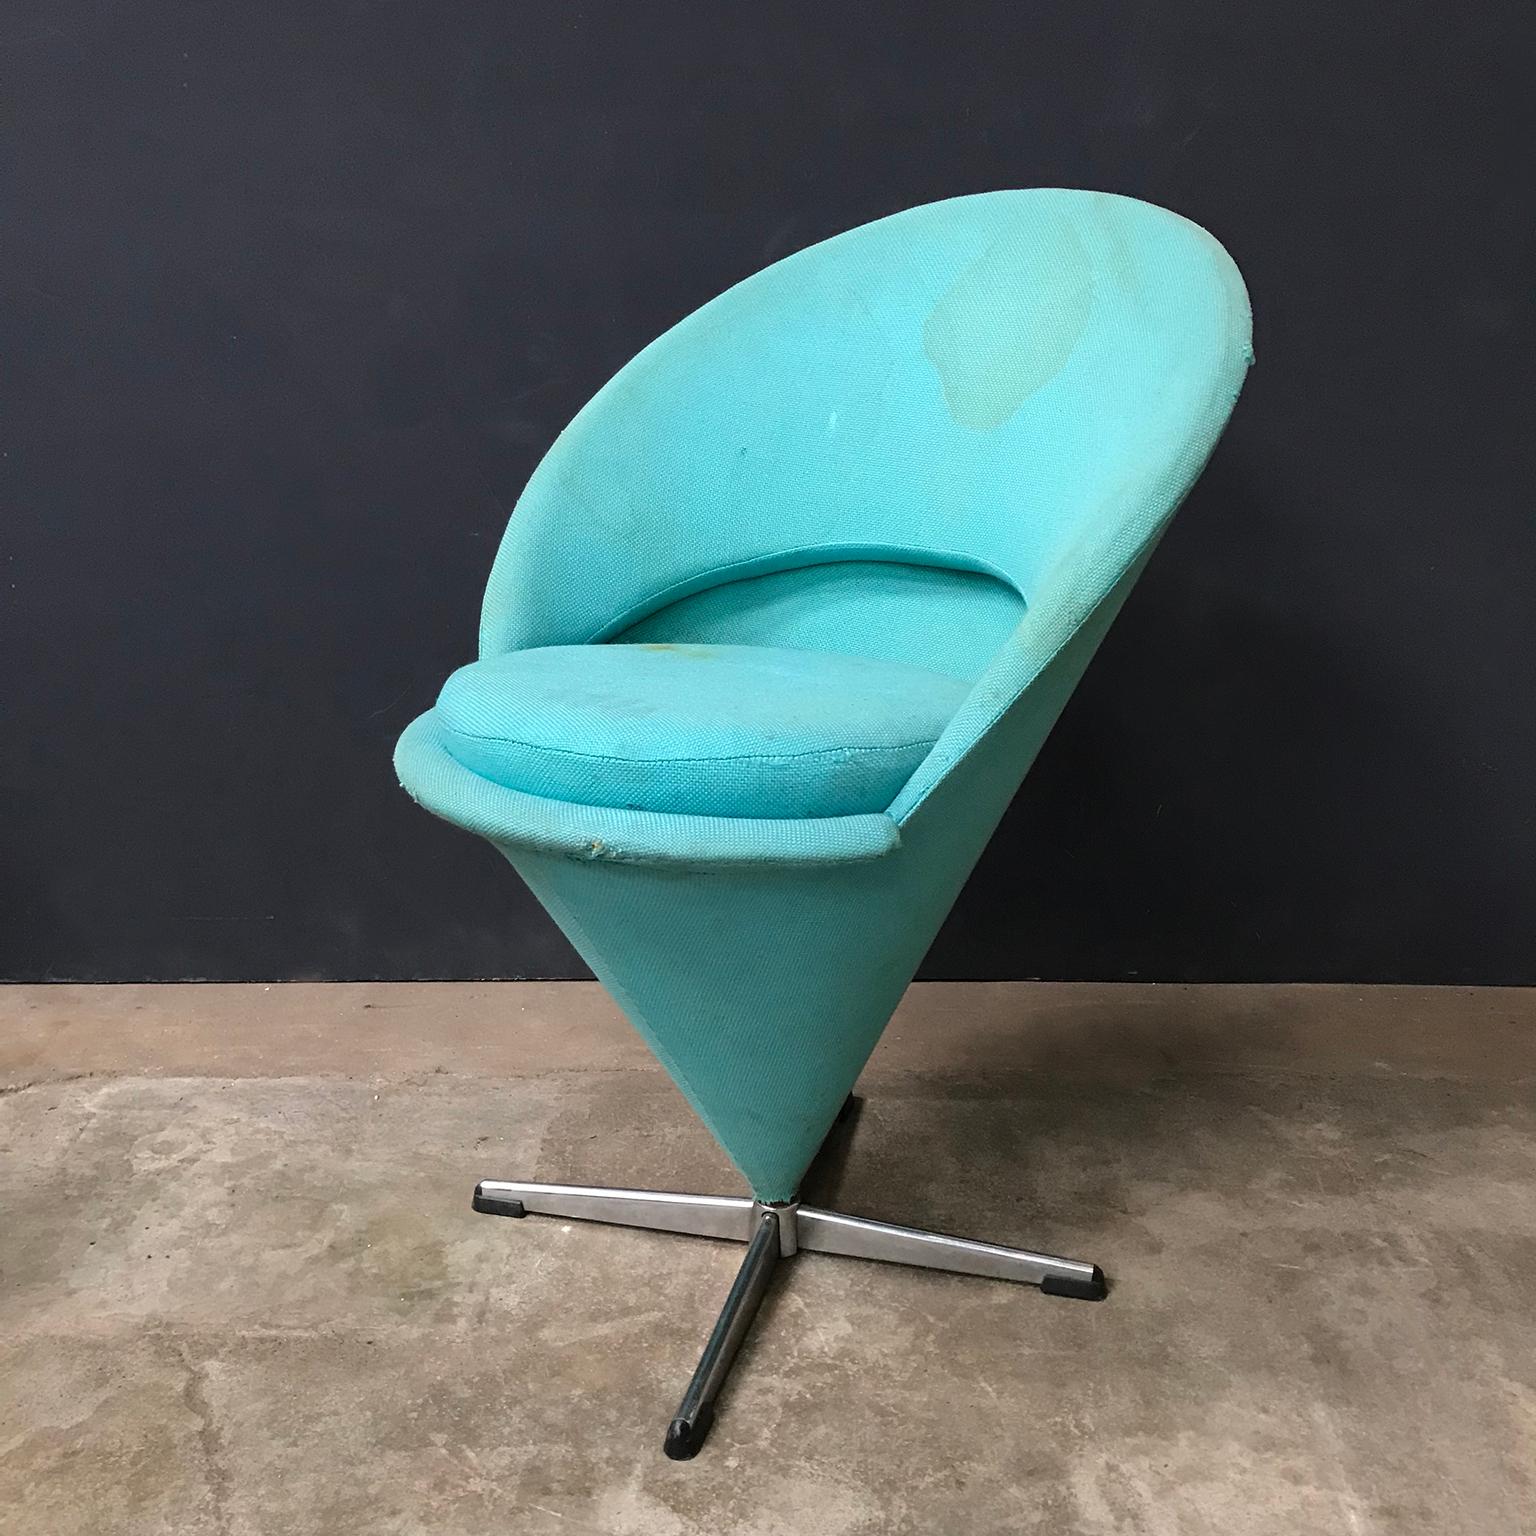 Cone chair in turquoise original upholstery. Iconic chair, comfortable as side chair or dining chair. The chair shows traces of wear, like stains and changes of colour of the upholstery. Also (tiny) damages of the fabric as pictures #5, #6, #8, #10